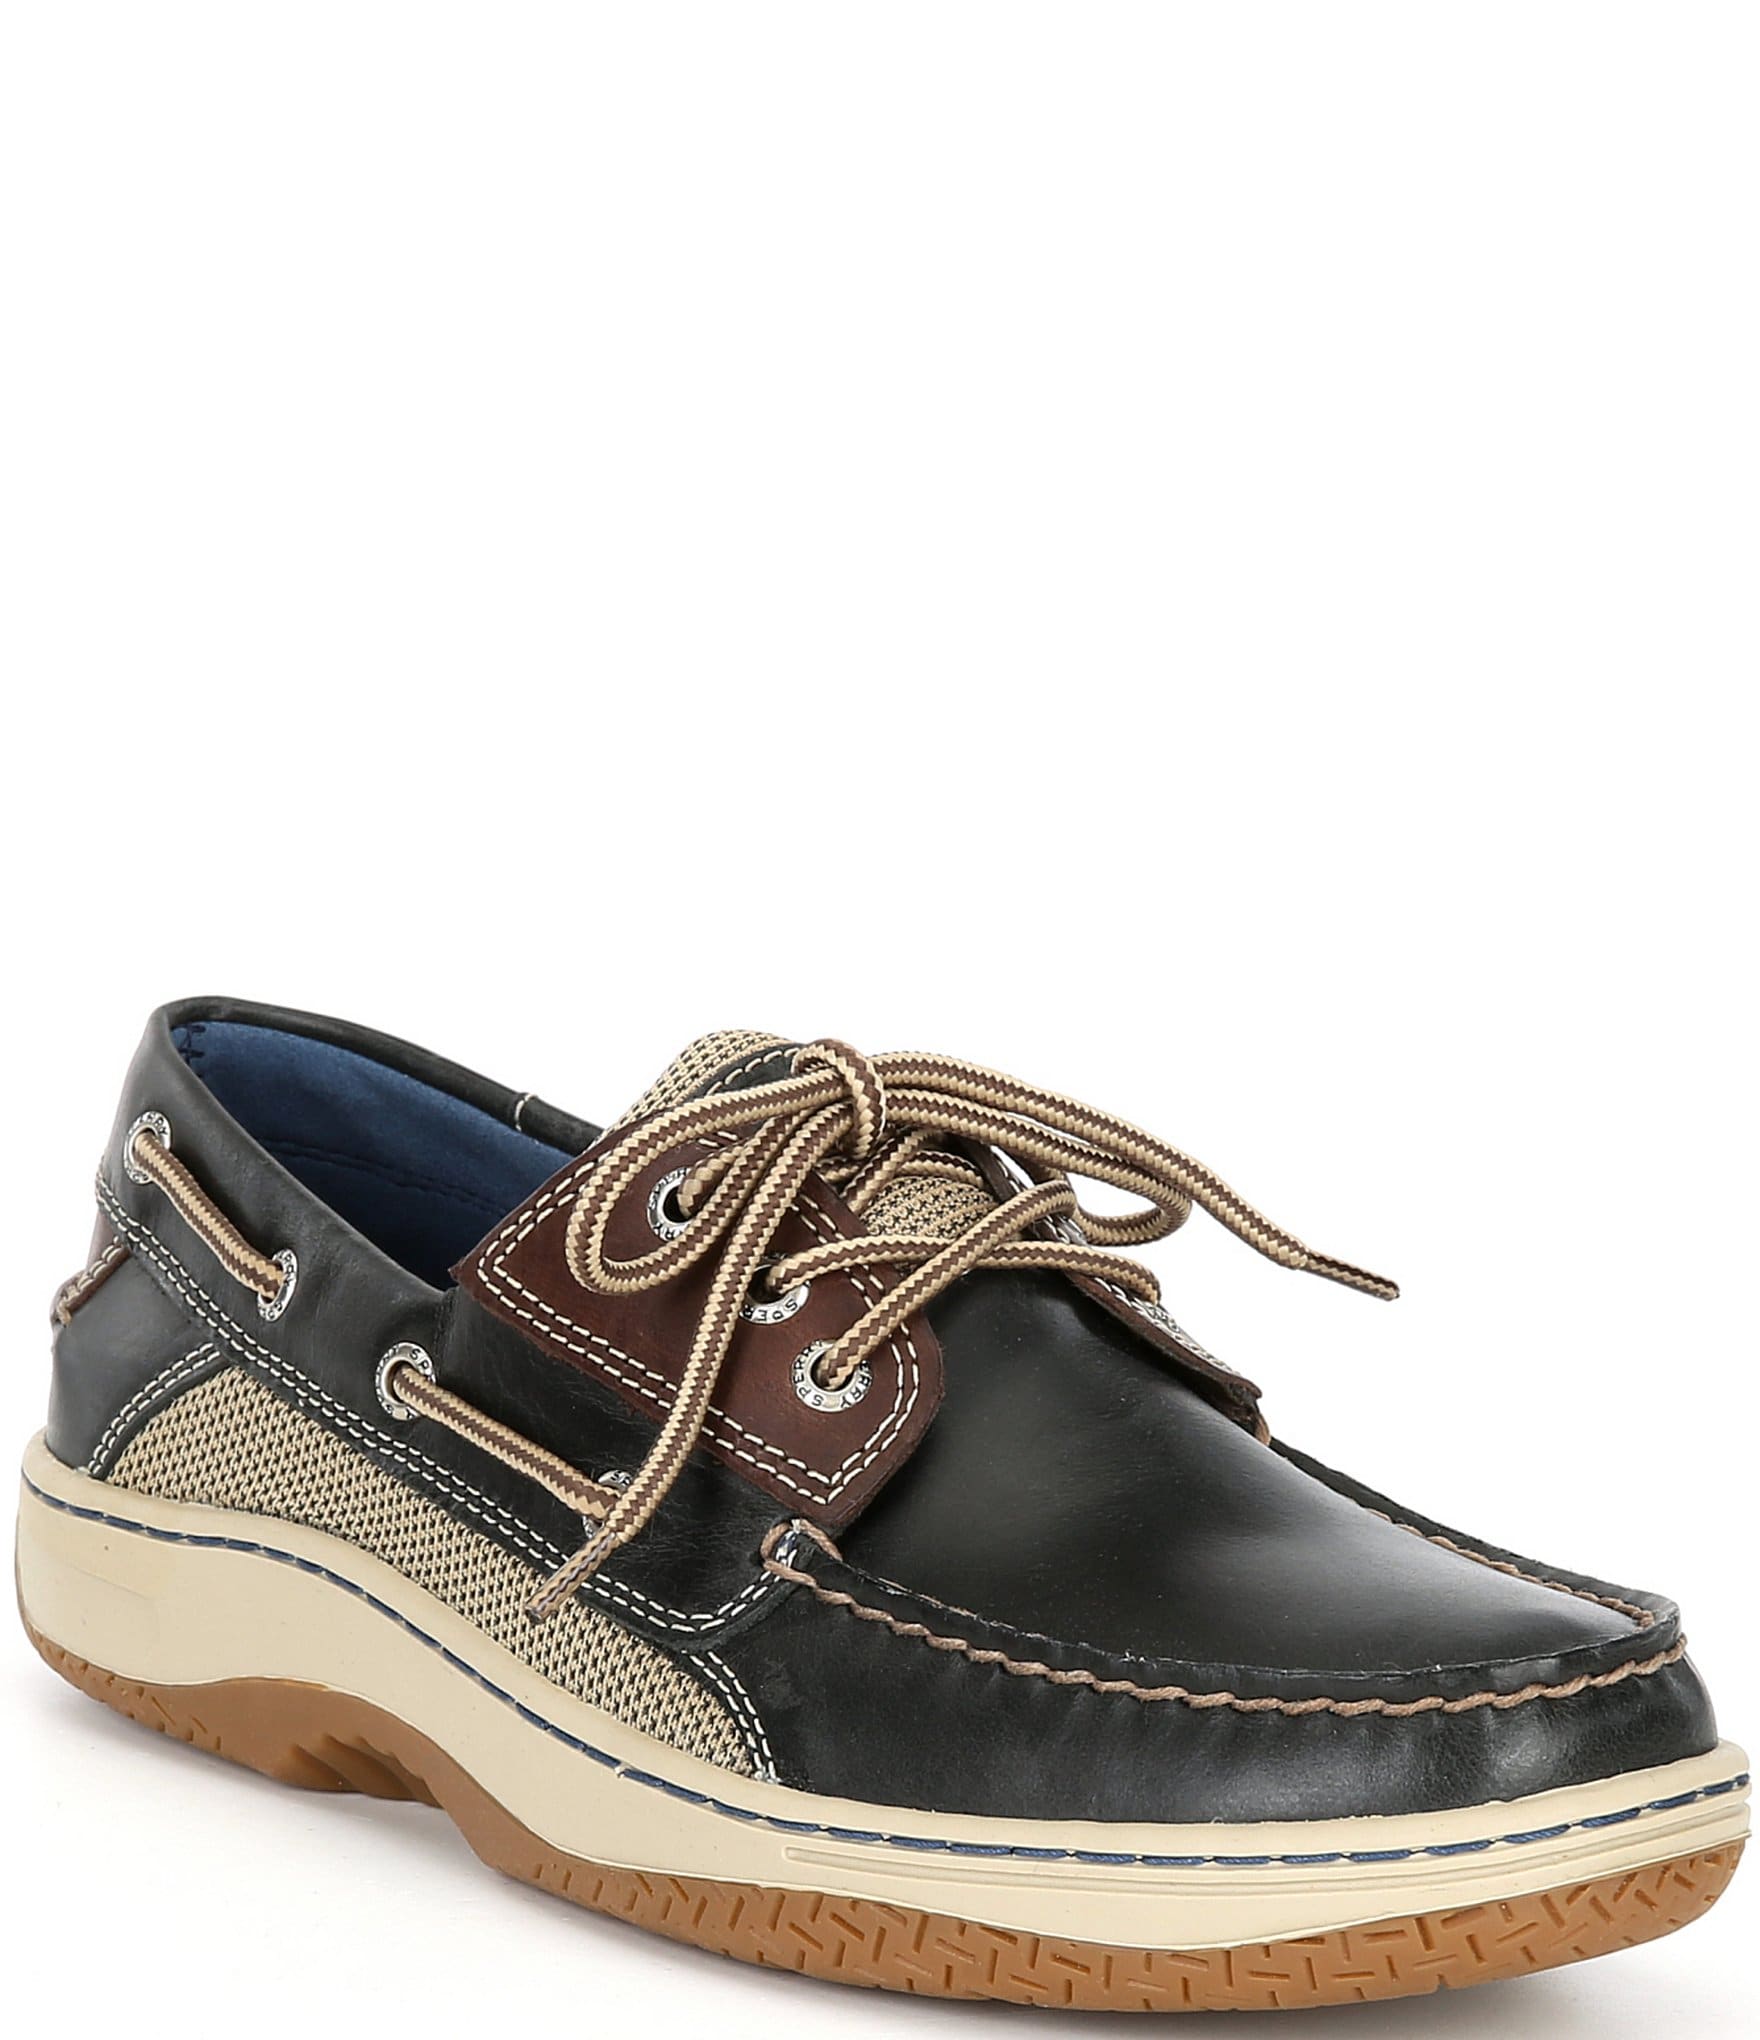  Sperry Shoe Laces